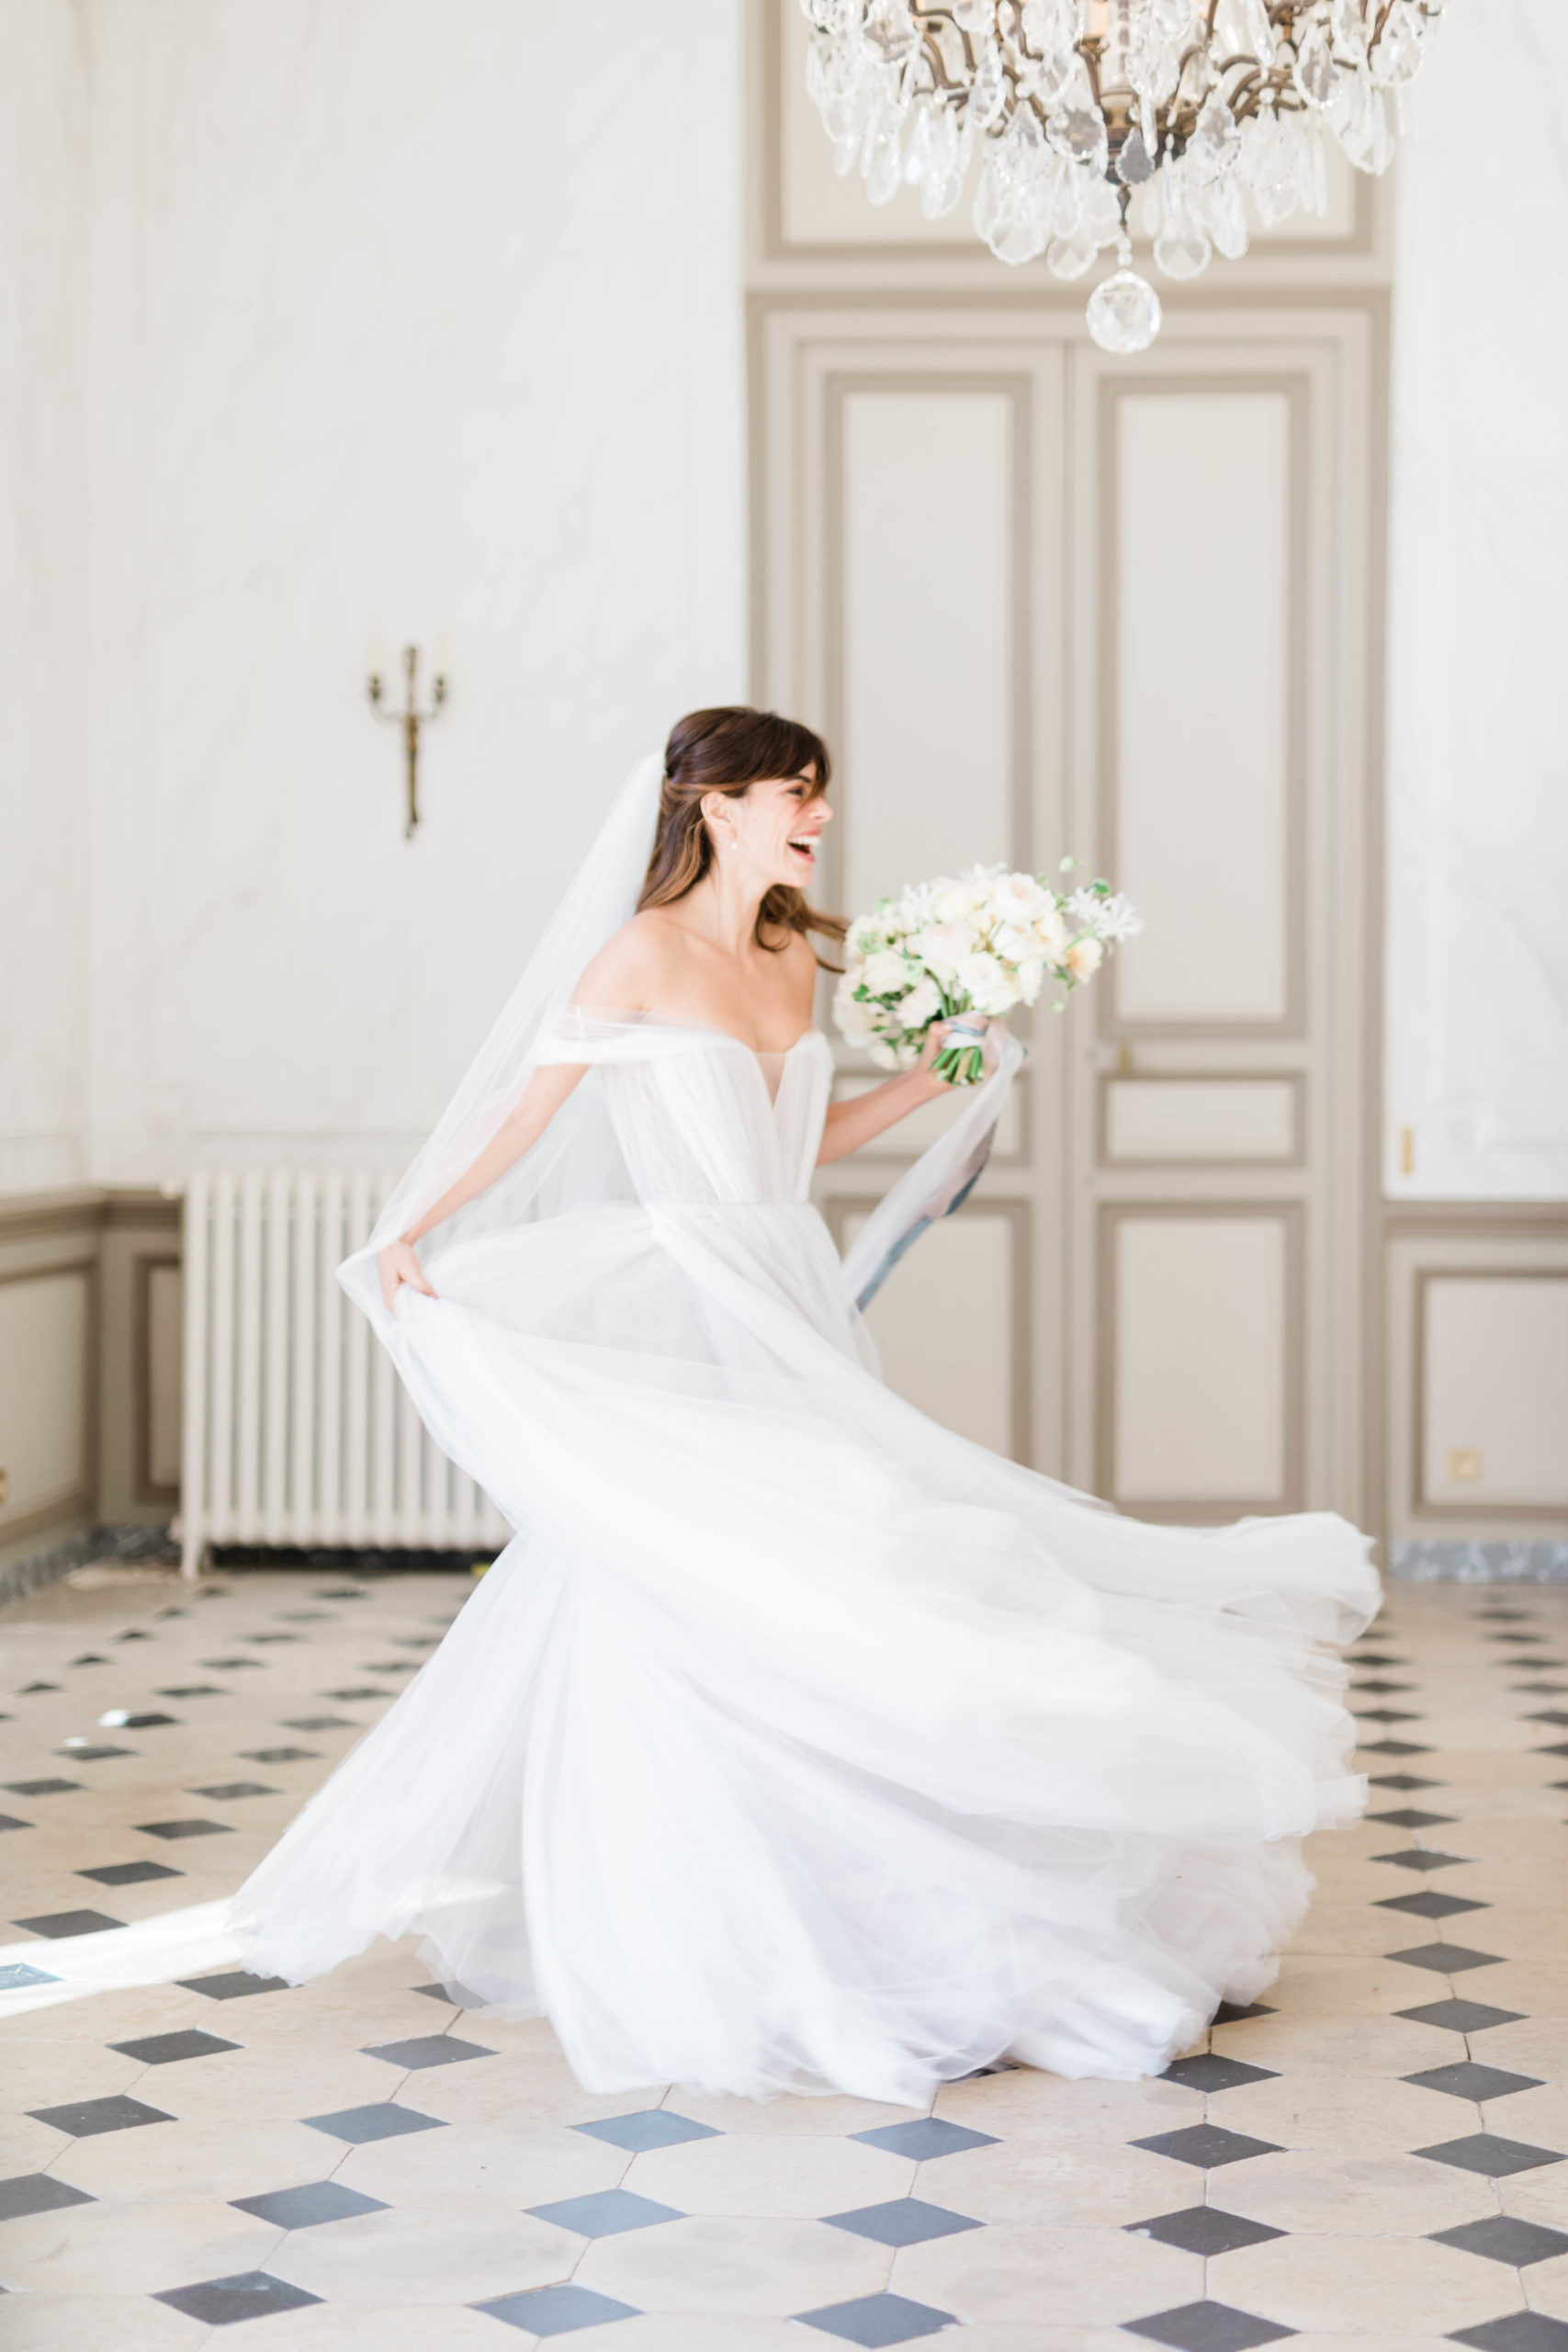 bride dancing in her wedding dress in a castle hall while holding her floral bouquet